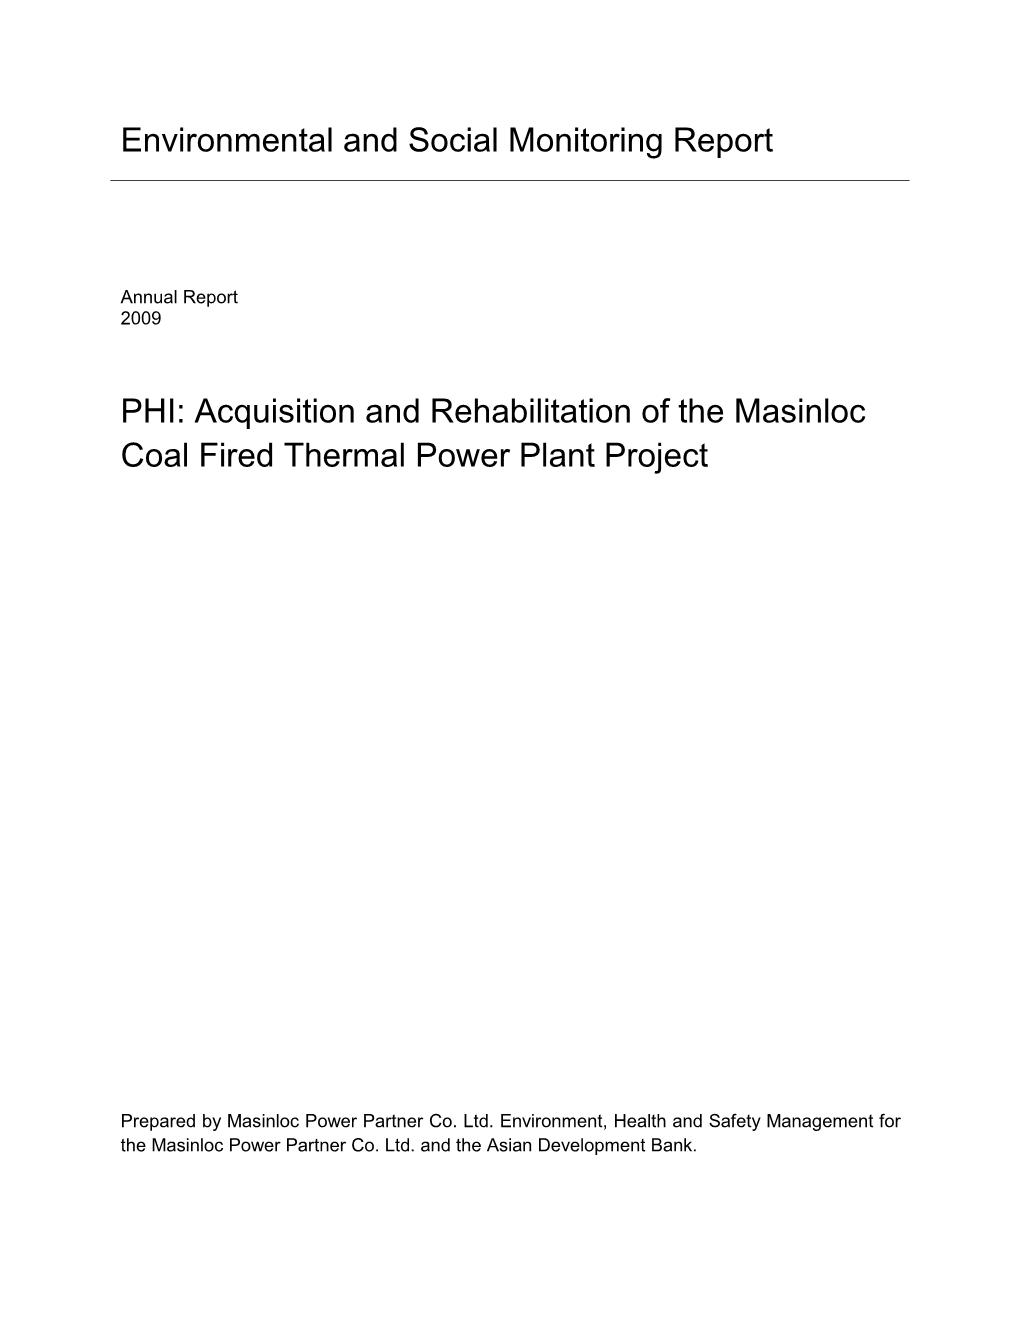 Masinloc Coal Fired Thermal Power Plant Project